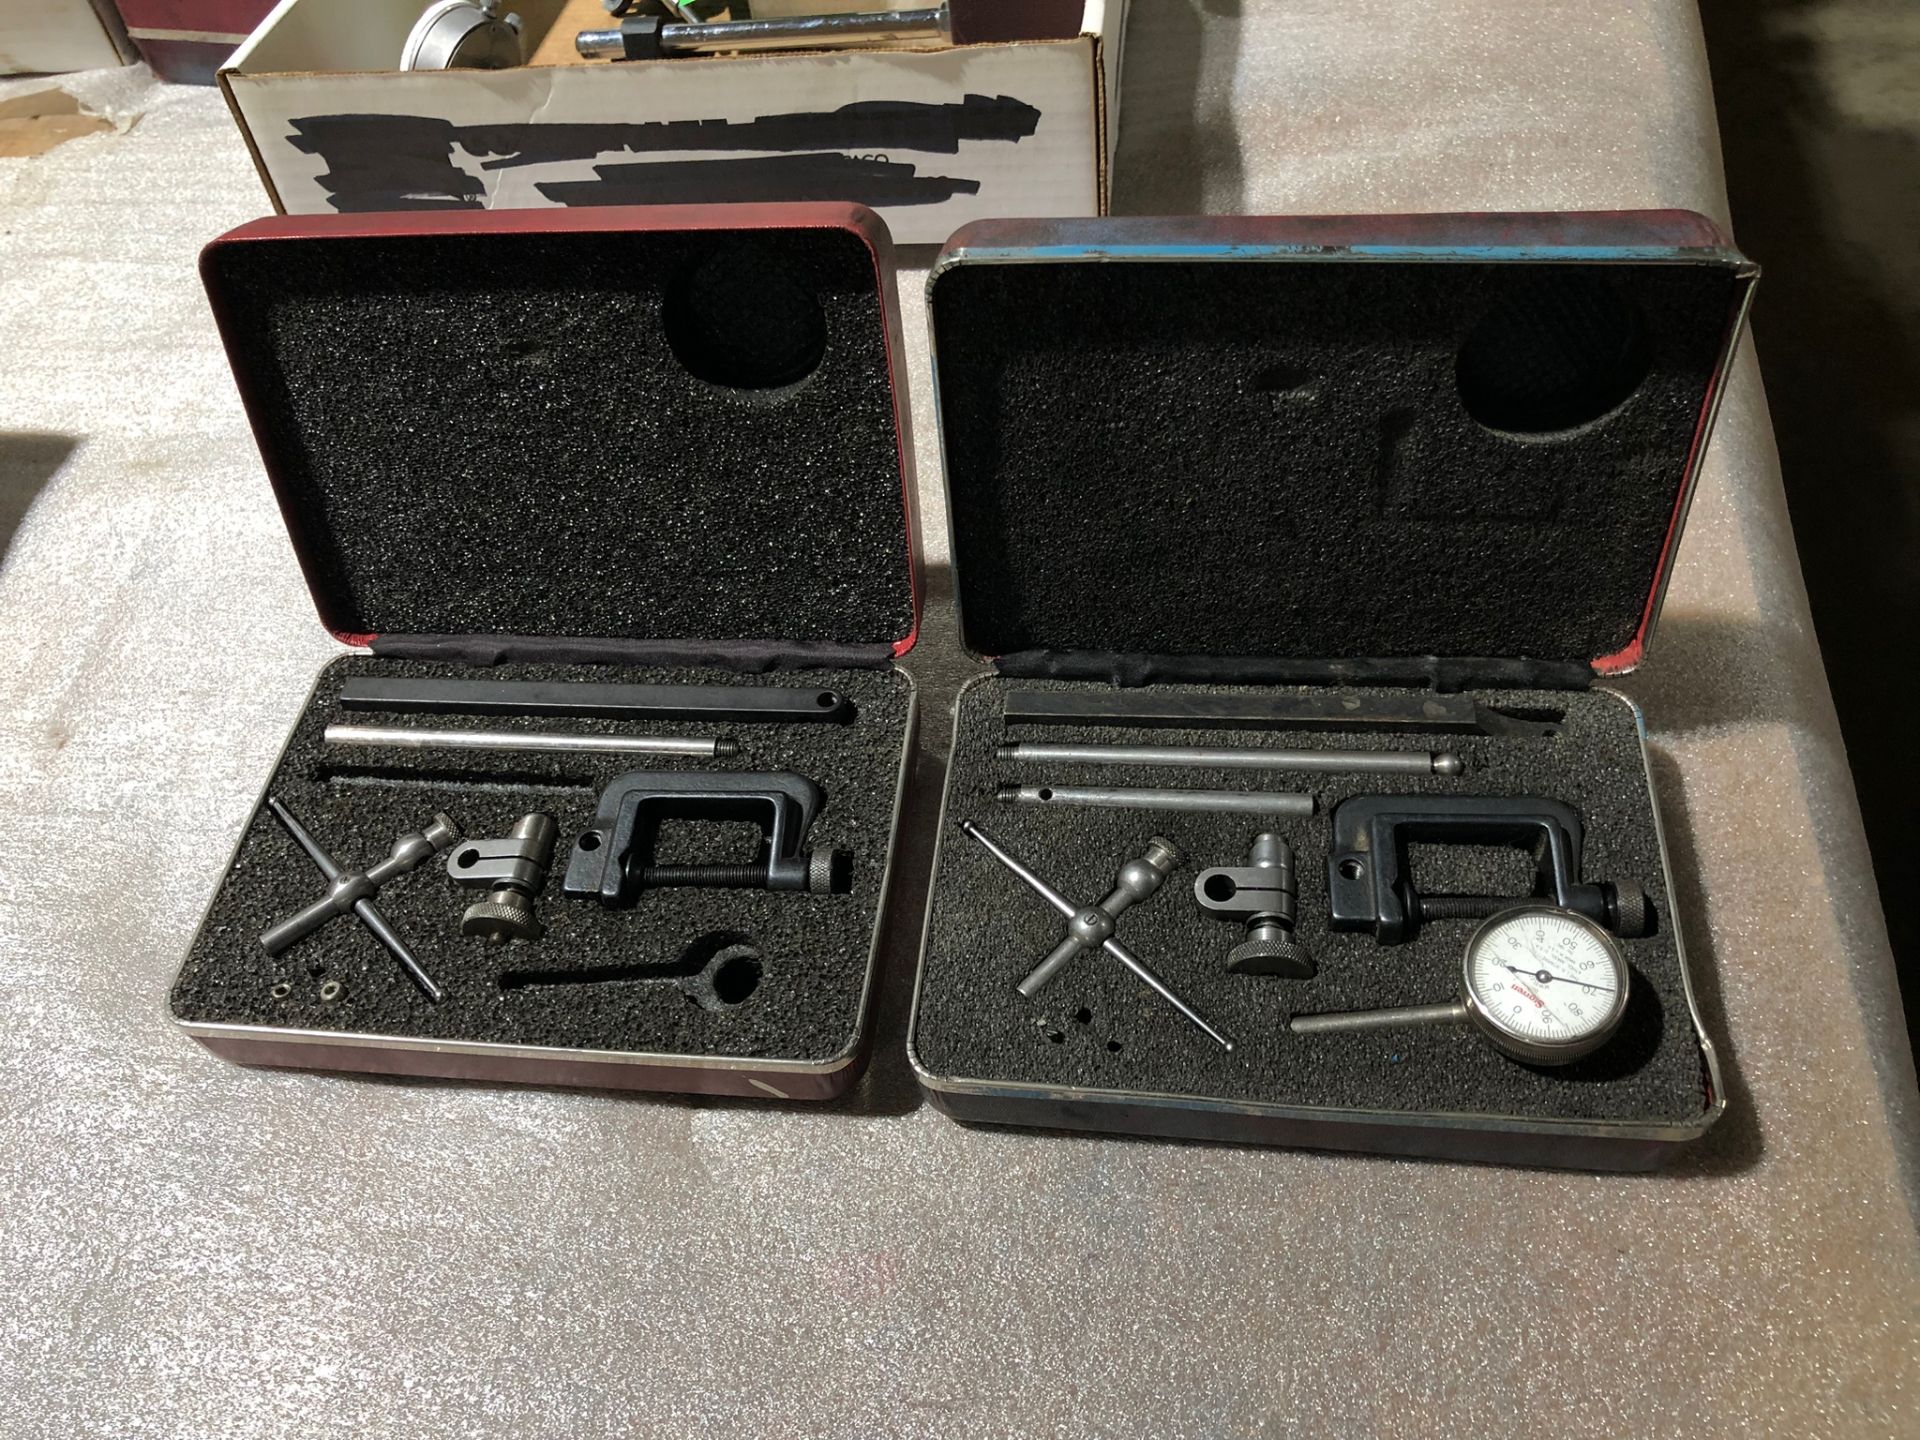 Lot of 2 (2 sets) Starrett Dial Indicator with 2 stands in cases - Image 2 of 3